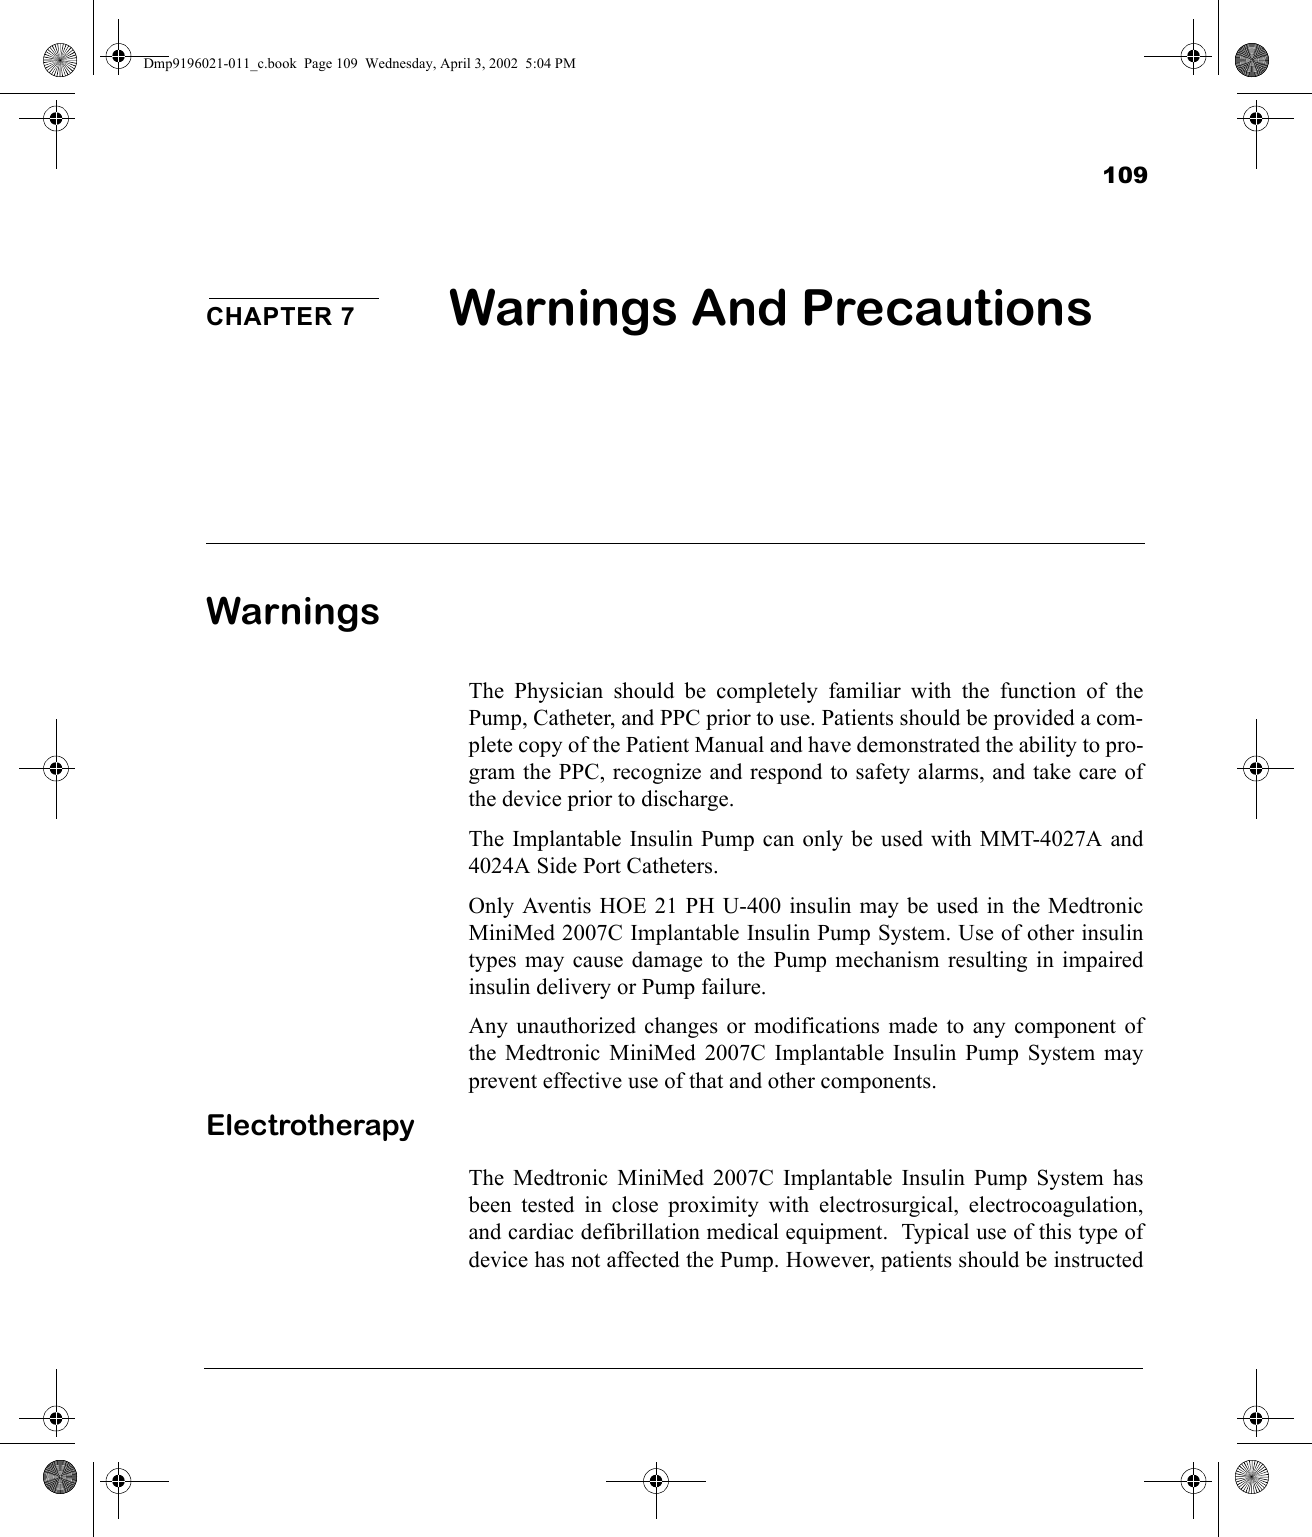 109CHAPTER 7 Warnings And Precautions WarningsThe Physician should be completely familiar with the function of thePump, Catheter, and PPC prior to use. Patients should be provided a com-plete copy of the Patient Manual and have demonstrated the ability to pro-gram the PPC, recognize and respond to safety alarms, and take care ofthe device prior to discharge.The Implantable Insulin Pump can only be used with MMT-4027A and4024A Side Port Catheters.Only Aventis HOE 21 PH U-400 insulin may be used in the MedtronicMiniMed 2007C Implantable Insulin Pump System. Use of other insulintypes may cause damage to the Pump mechanism resulting in impairedinsulin delivery or Pump failure.Any unauthorized changes or modifications made to any component ofthe Medtronic MiniMed 2007C Implantable Insulin Pump System mayprevent effective use of that and other components.ElectrotherapyThe Medtronic MiniMed 2007C Implantable Insulin Pump System hasbeen tested in close proximity with electrosurgical, electrocoagulation,and cardiac defibrillation medical equipment.  Typical use of this type ofdevice has not affected the Pump. However, patients should be instructedDmp9196021-011_c.book  Page 109  Wednesday, April 3, 2002  5:04 PM